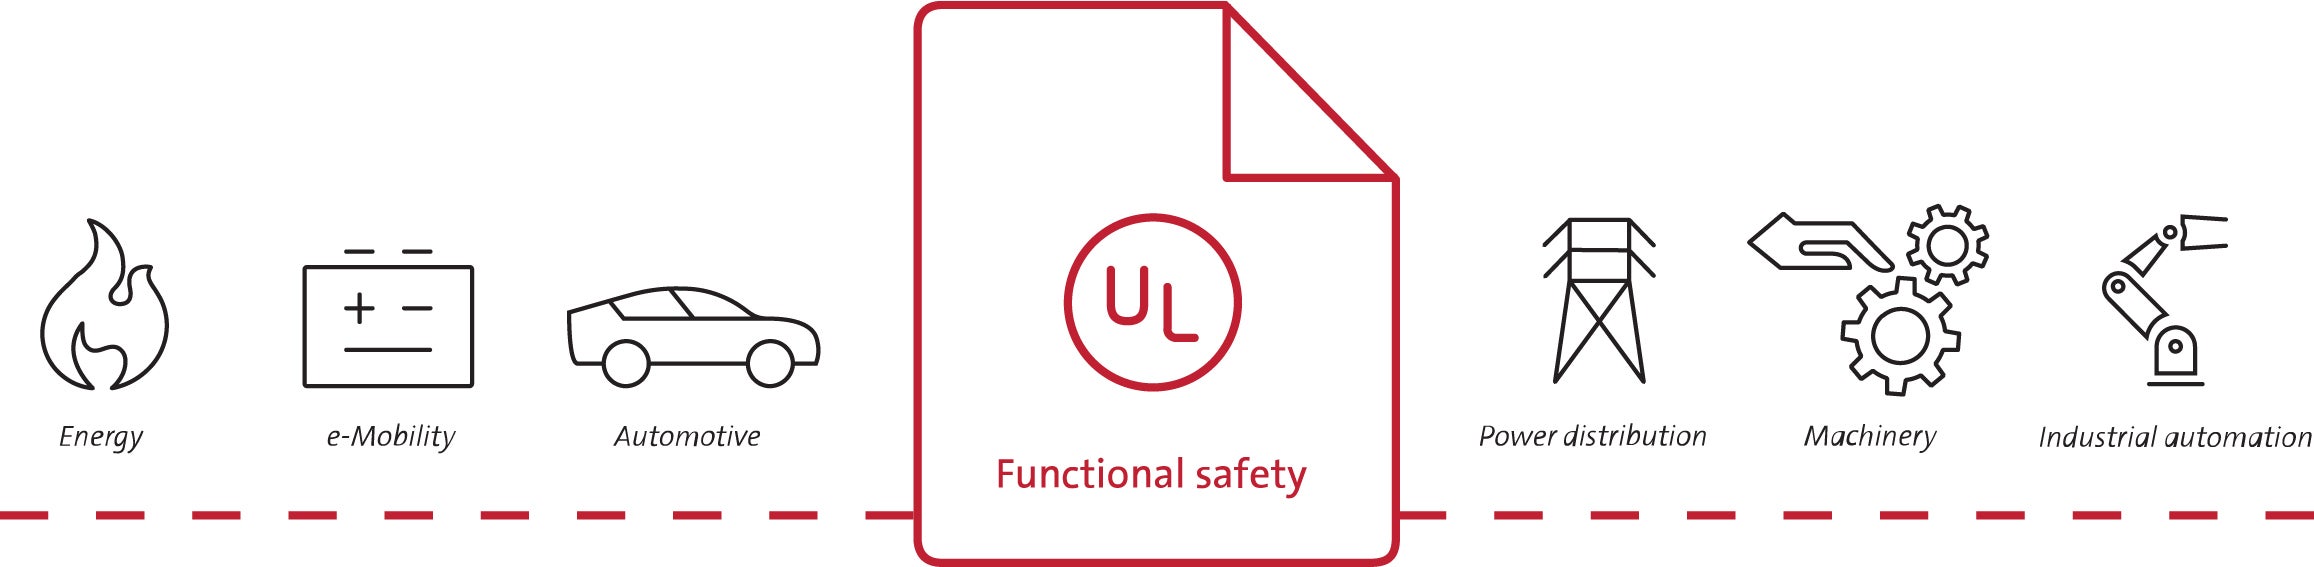 Icons that show the various industries that functional safety touches including energy, e-mobility, automotive, machinery, industrial automation and power distribution